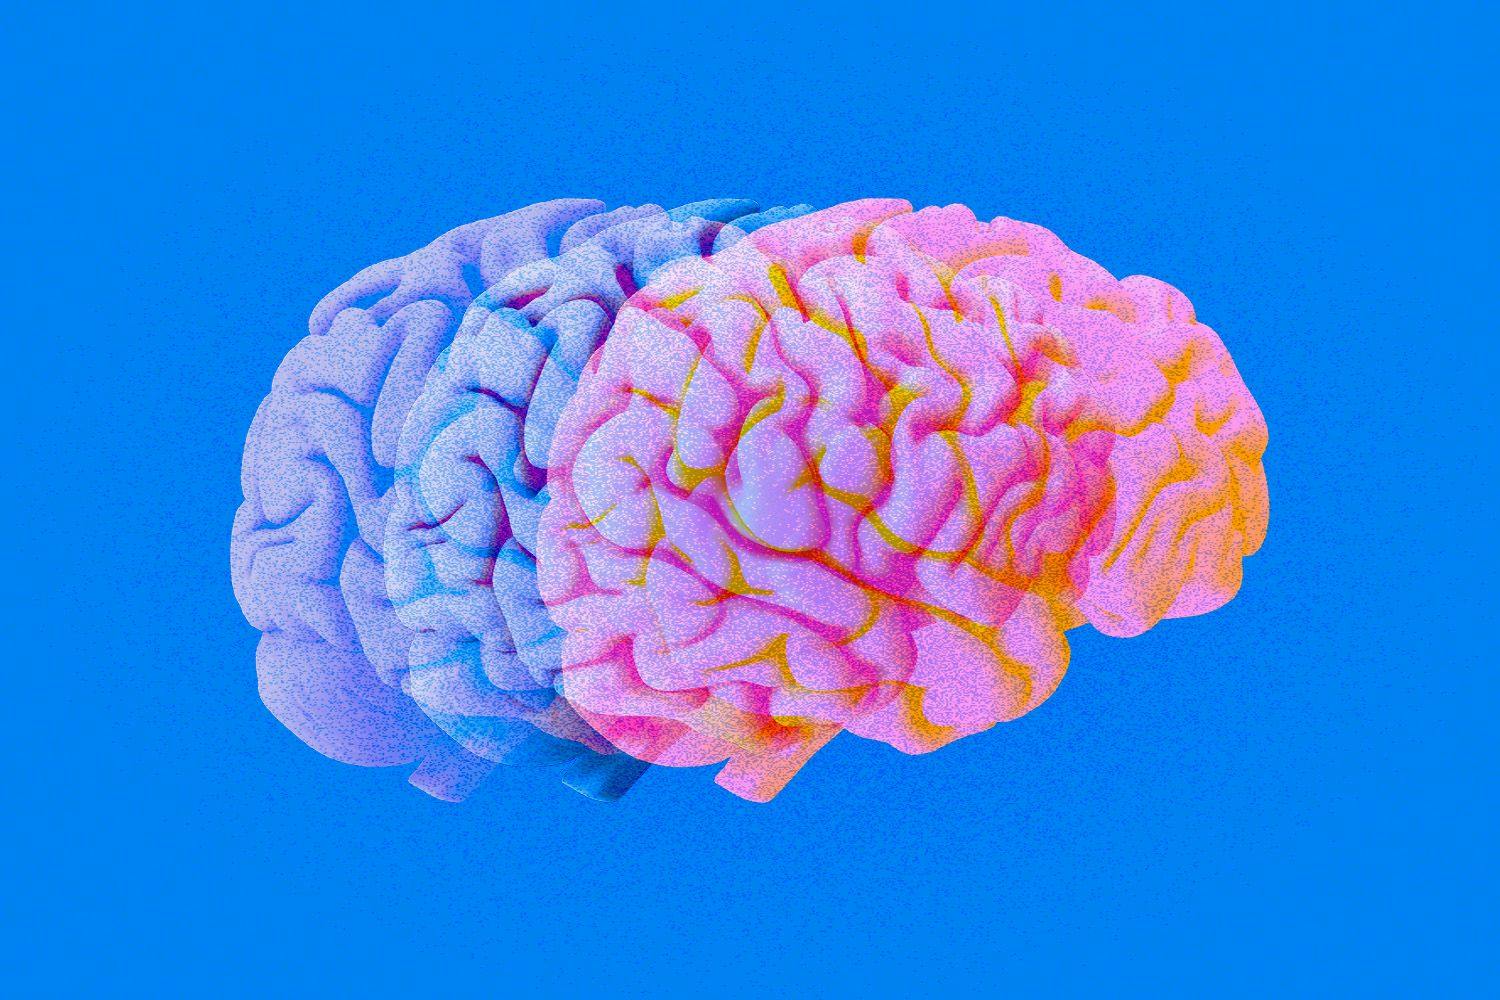 Image of transparent brains blending into each other.